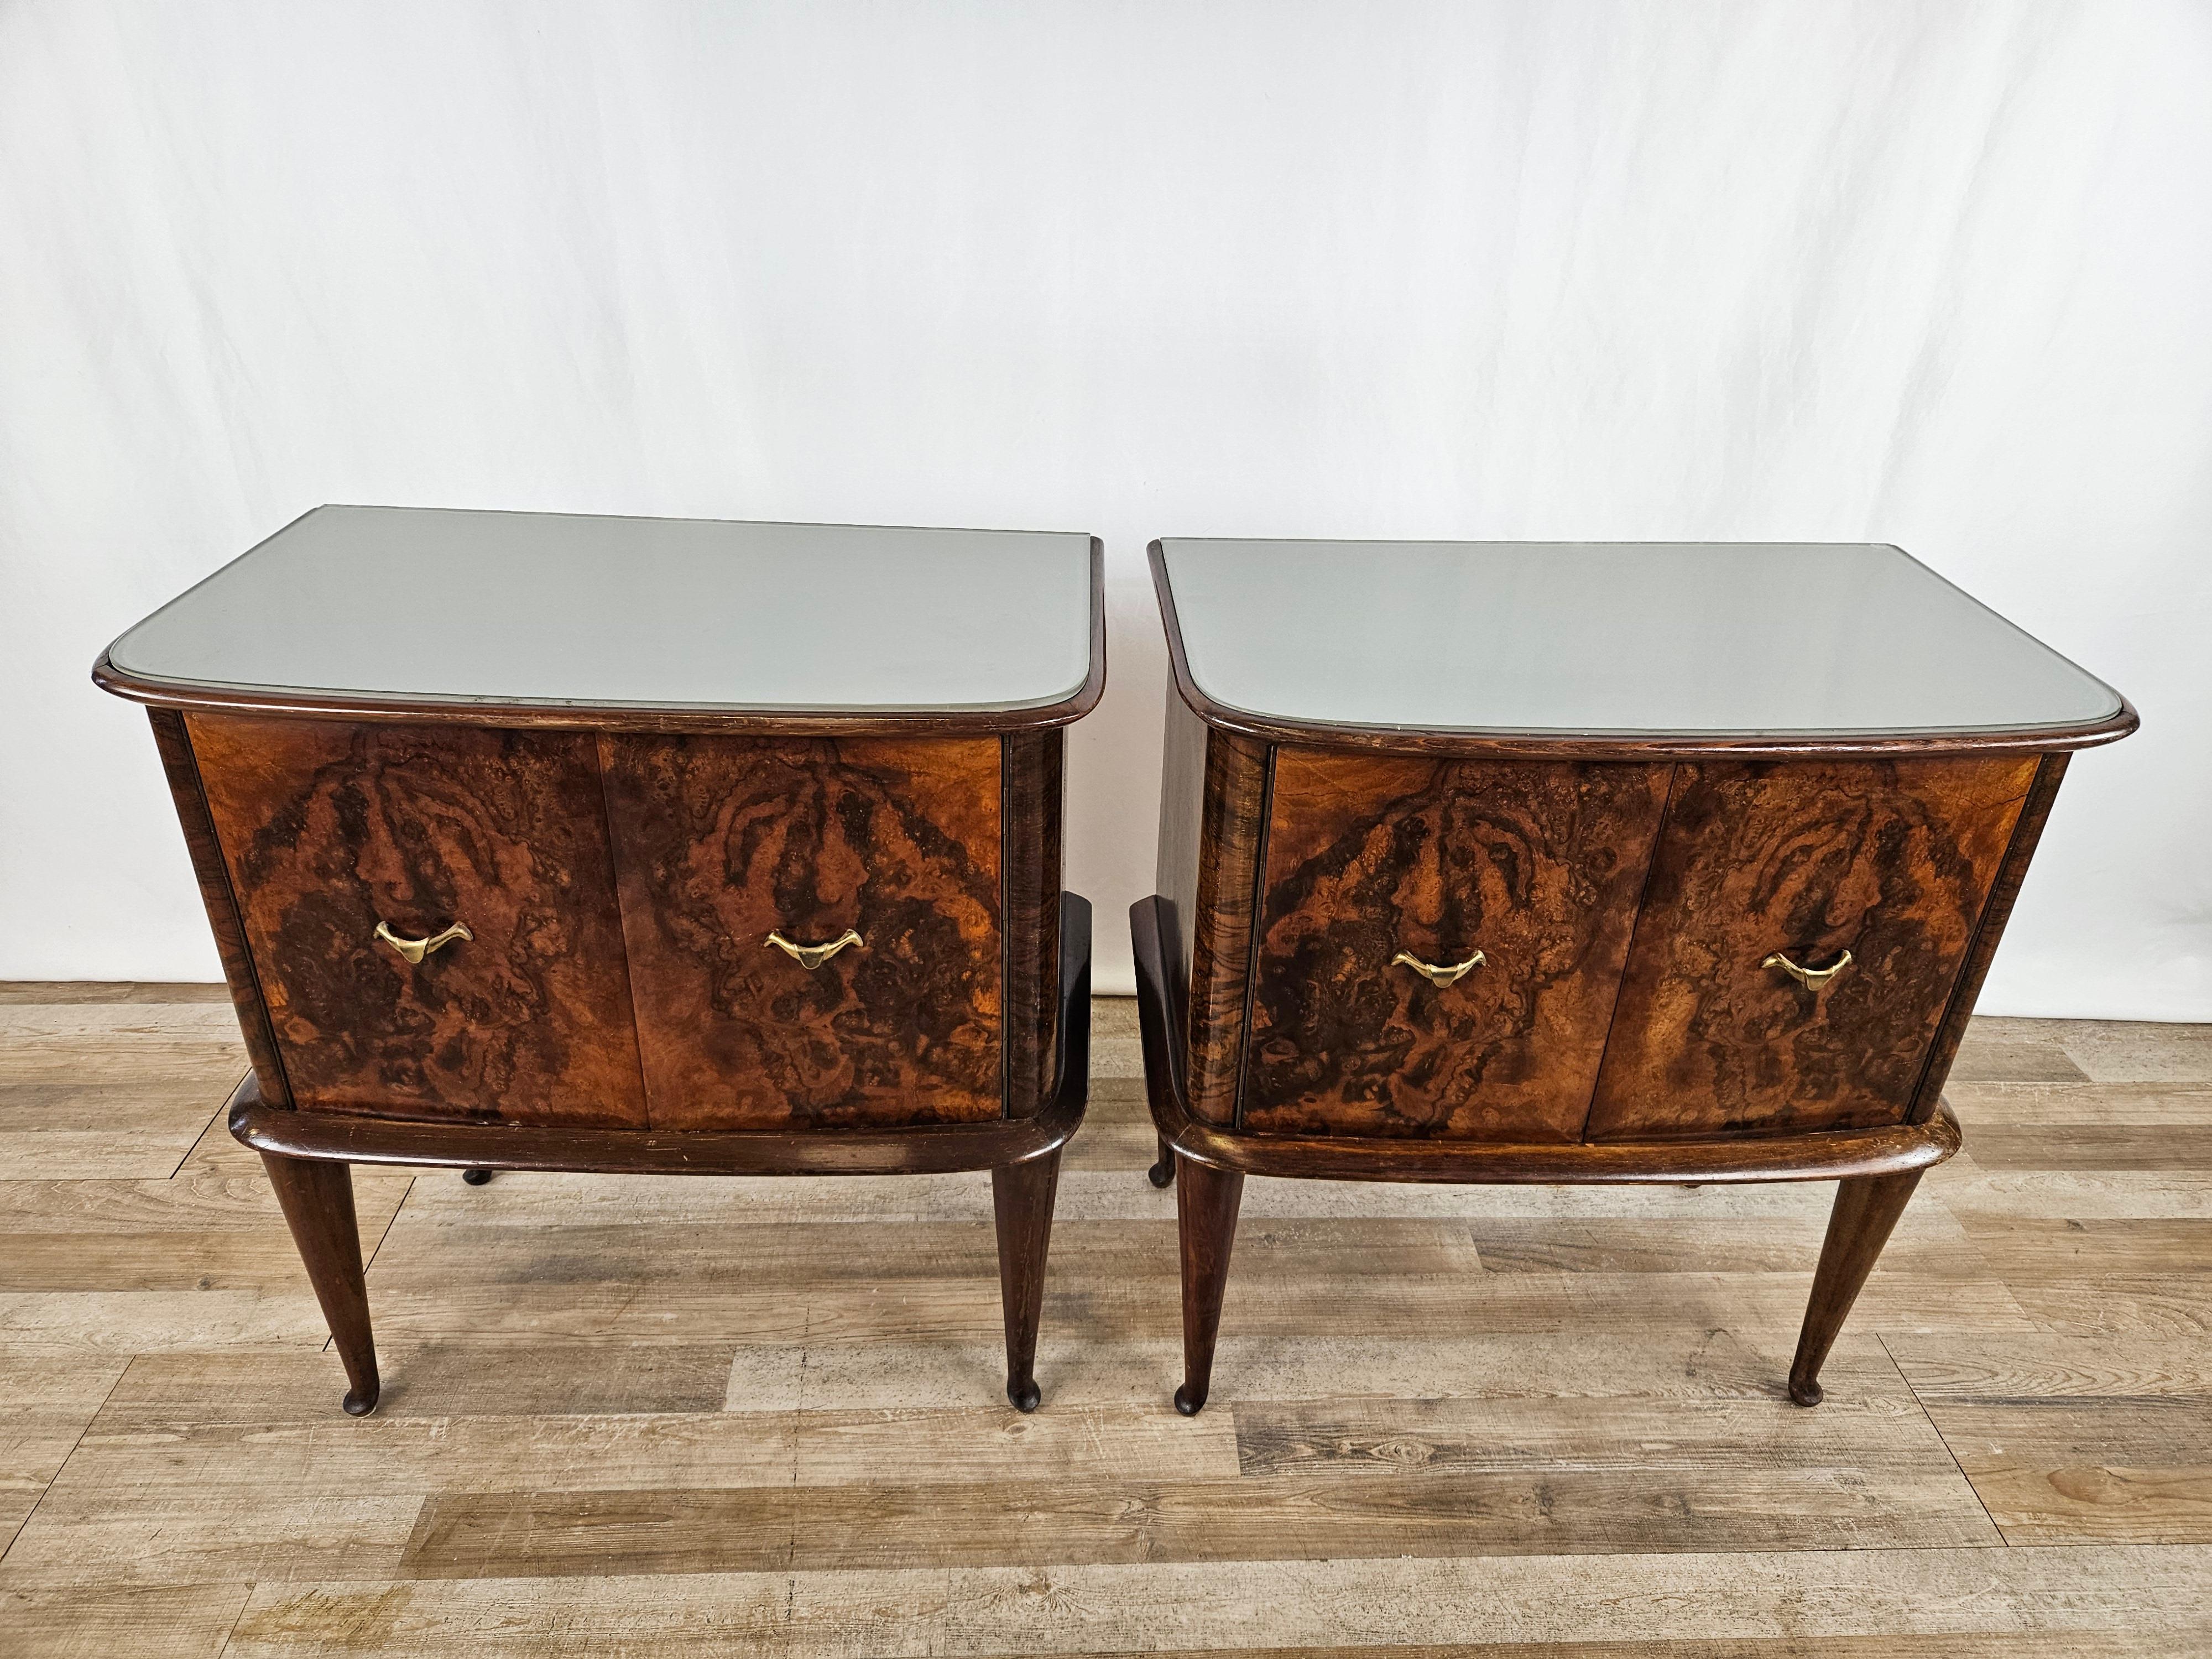 Pair of walnut burl bedside tables with double doors and large interior compartment.

Top with fine curved glass at front edges and original period brass handles.

Nightstands have been oil polished, still shows normal signs of wear due to age and